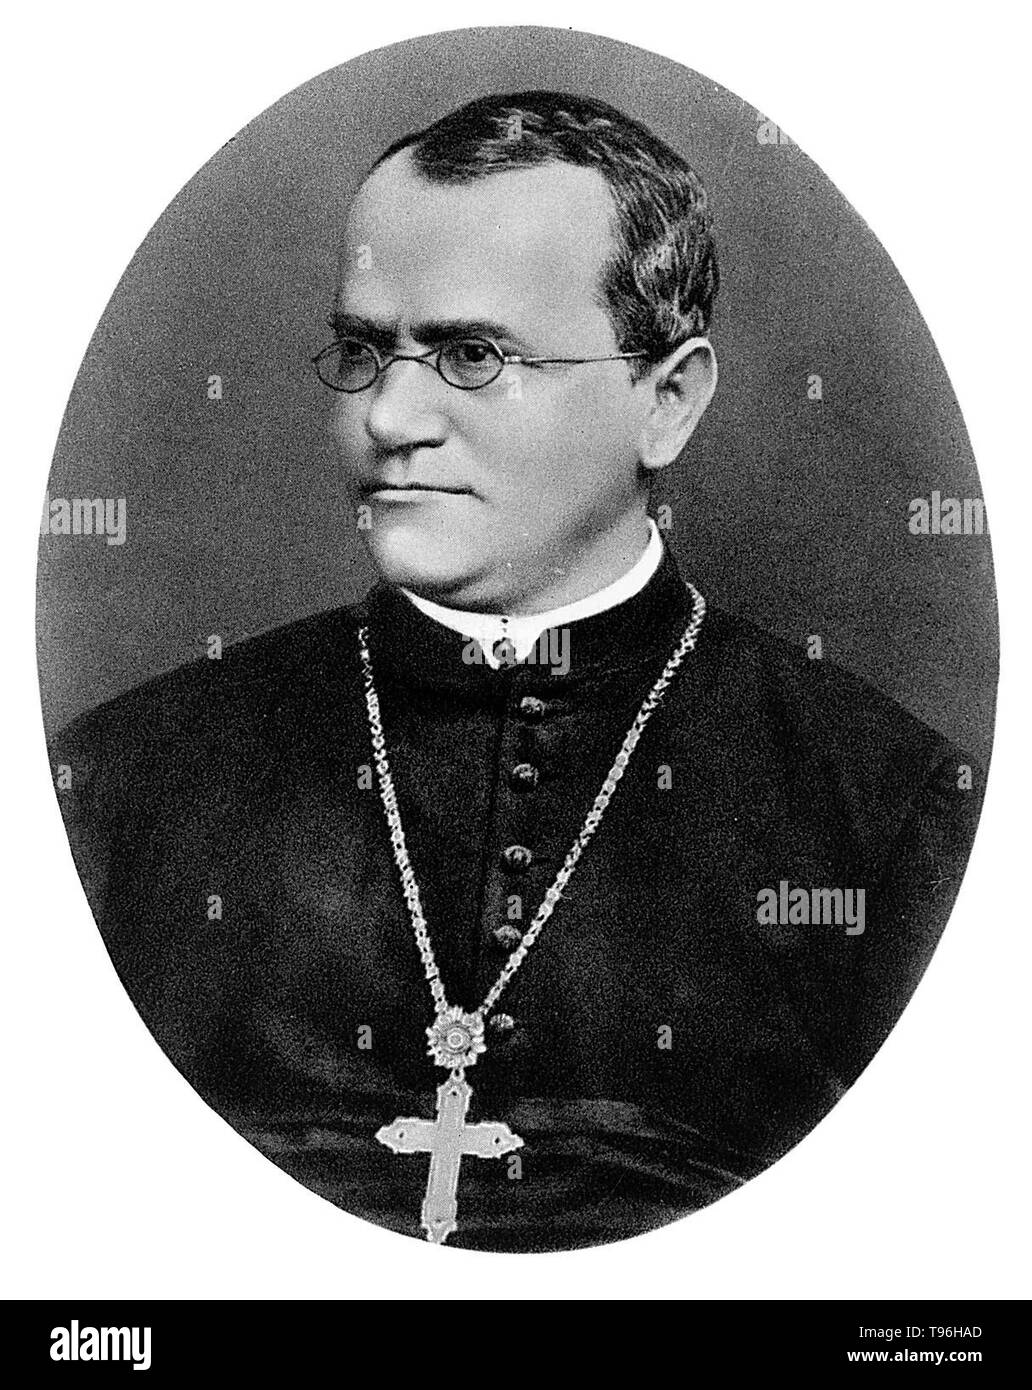 Gregor Johann Mendel (July 20, 1822 - January 6, 1884) was an Austrian scientist and Augustinian friar who gained posthumous fame as the founder of the new science of genetics. Mendel conducted experiments in a monastery in the 1860's with garden peas, working out the law of heredity based on ''factors'' (genes) that decide which characteristics are passed from parent to offspring. His documented work was entitled: ''Experiments with Plant Hybrids''. Stock Photo